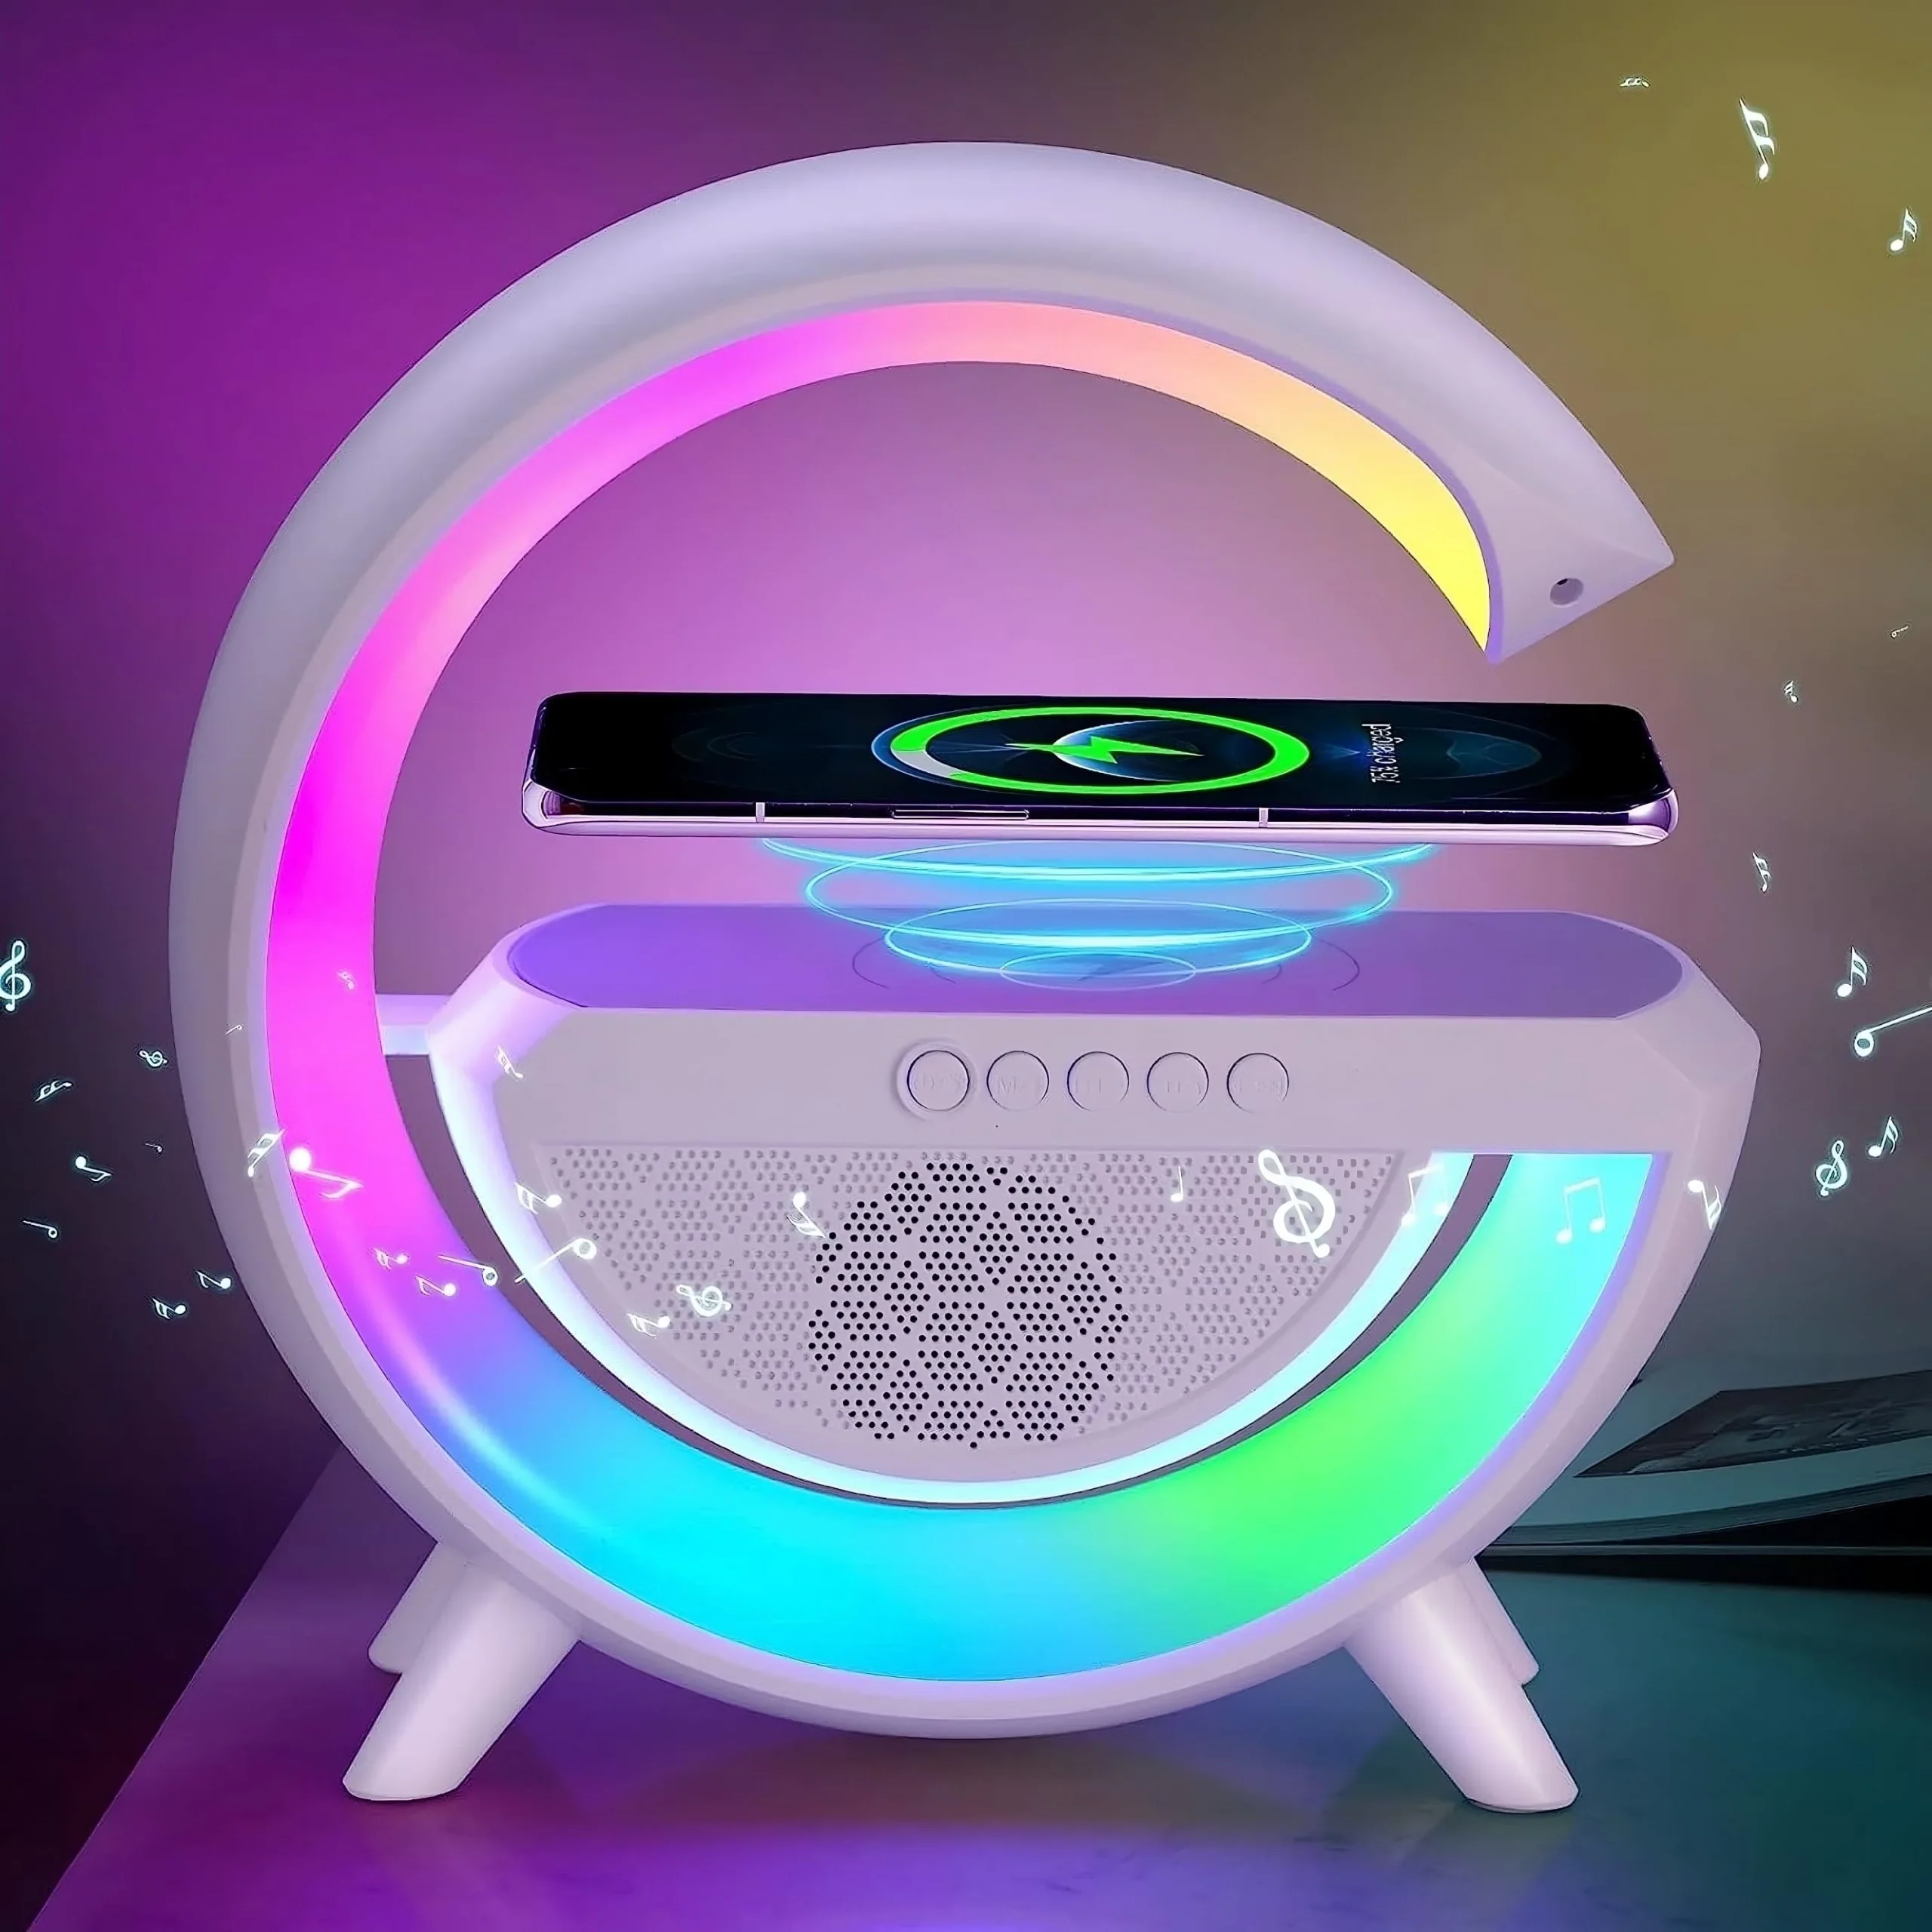 rgb-wireless-charger-rgb-night-light-alarm-clock-speaker-and-desk-lamp-perfect-for-iphone-android-useful-in-home-decoration-bedroom-gaming-room-866